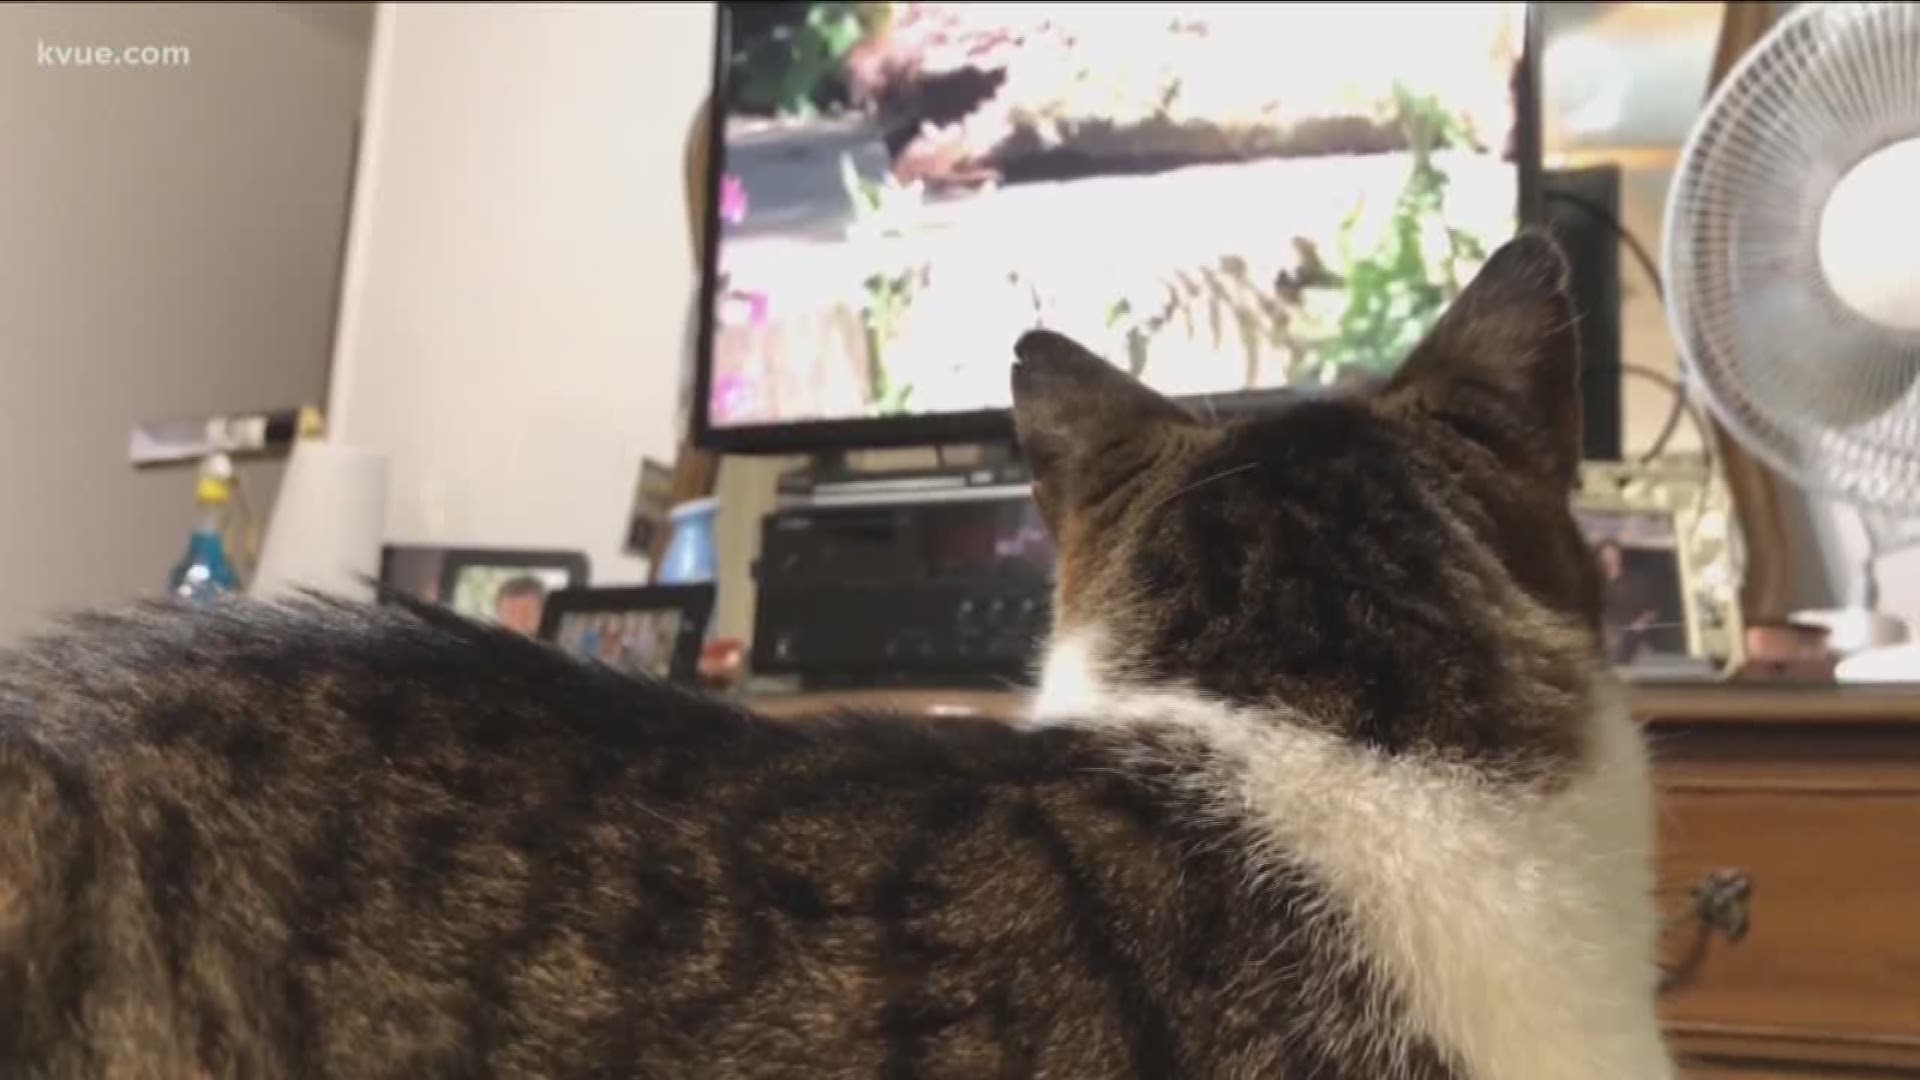 Did you ever think your cat might be as intrigued by TV as you are by "Game of Thrones?"